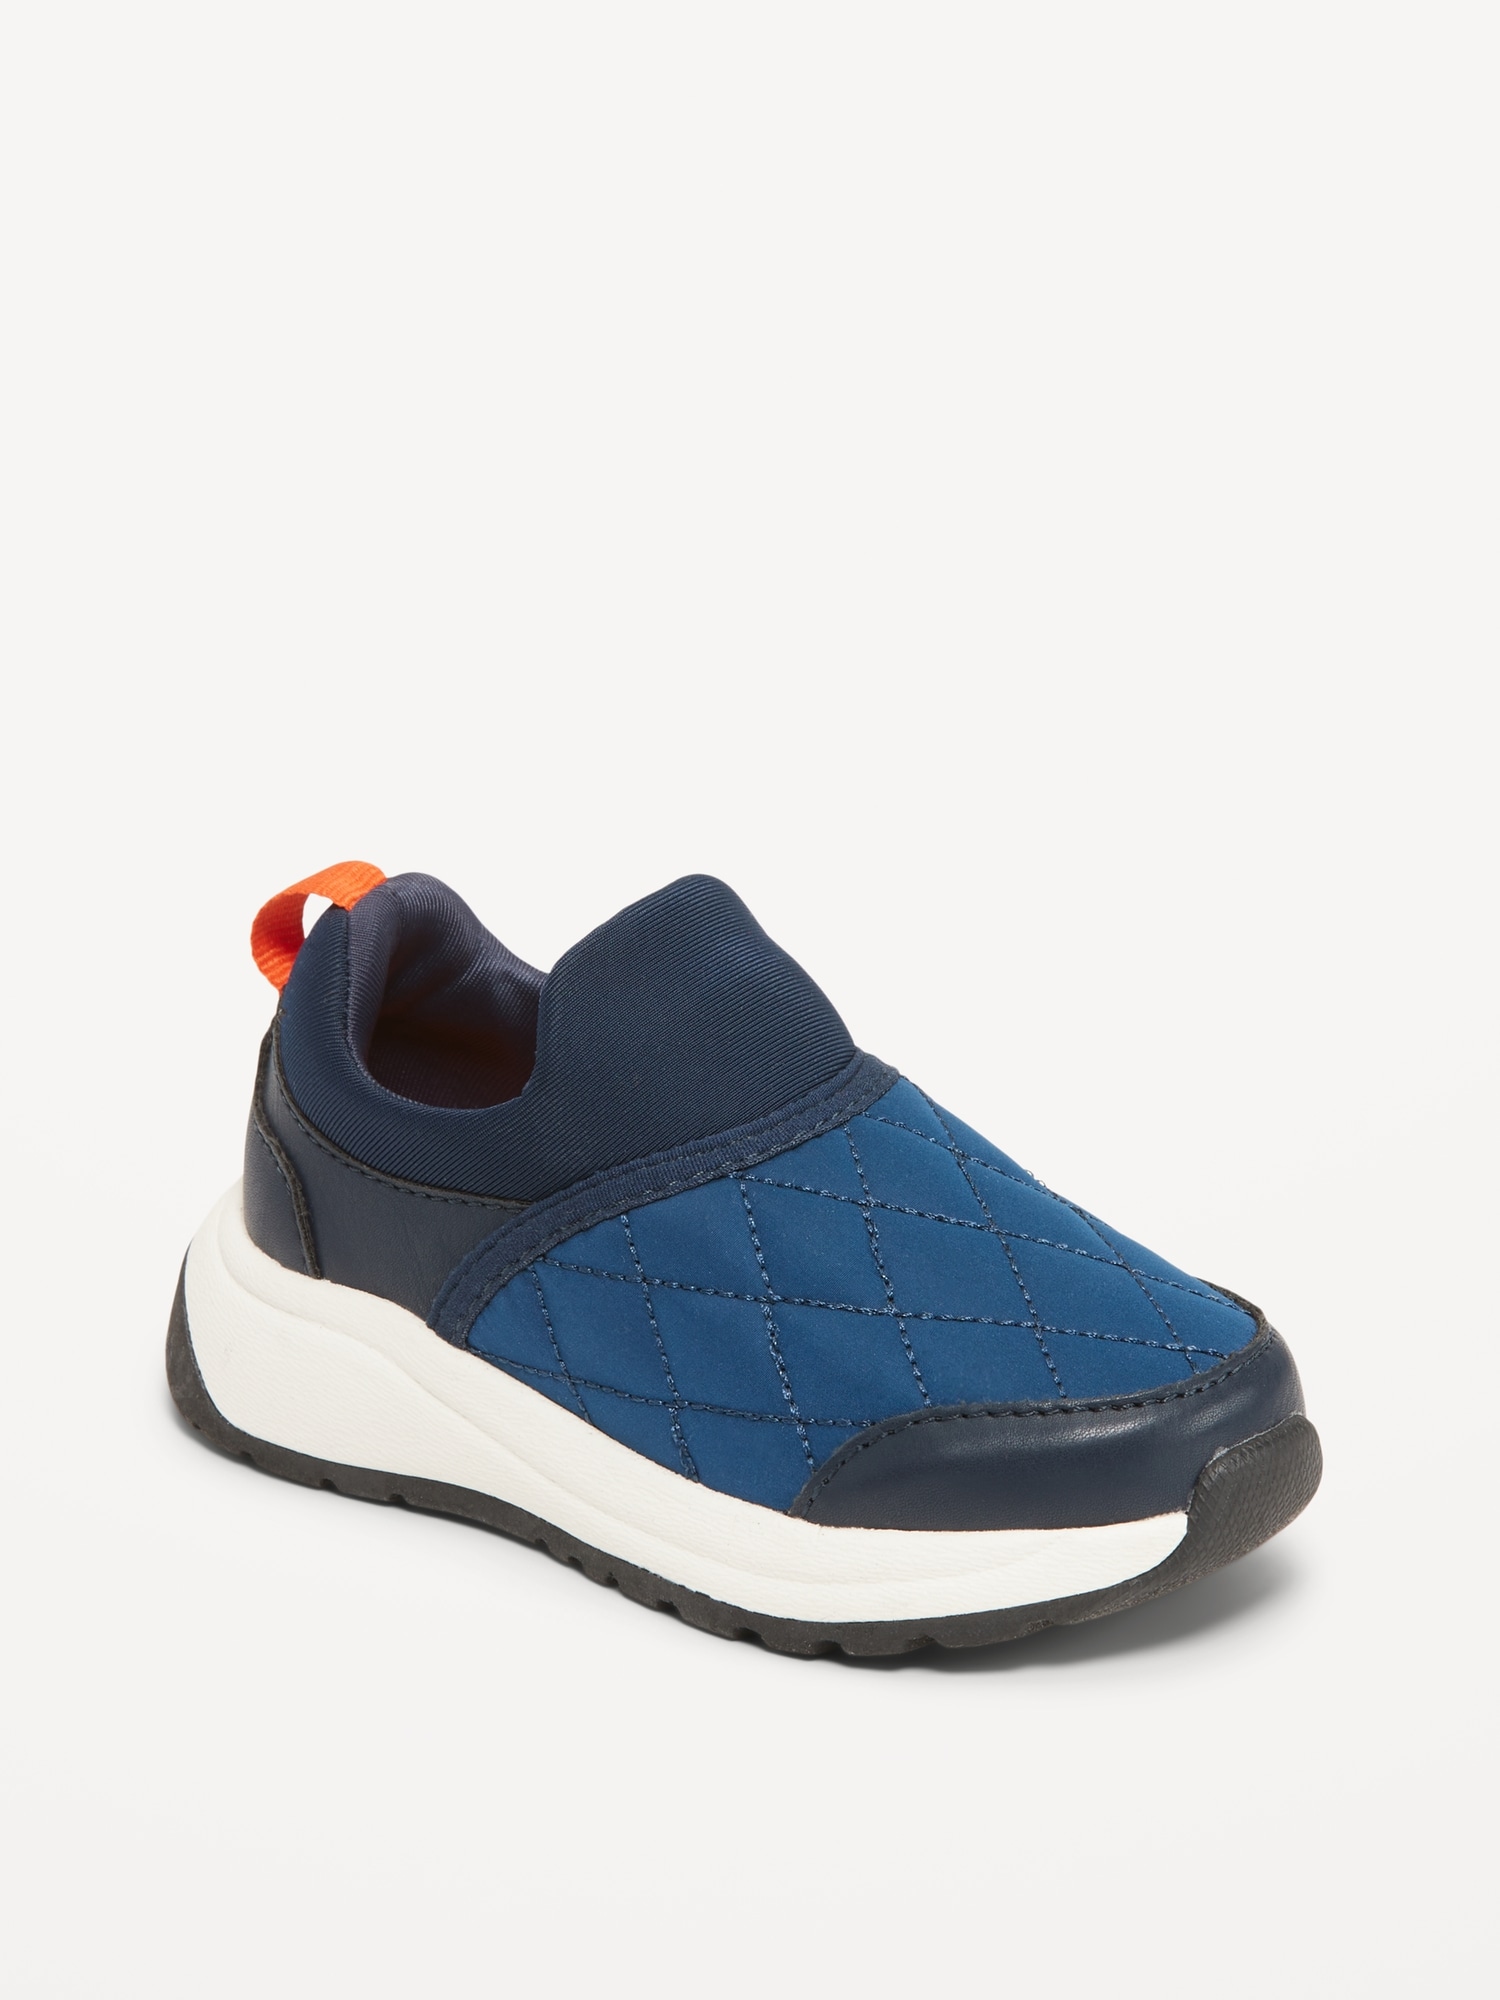 Oldnavy Chunky Quilted Slip-On Sneakers for Toddler Boys